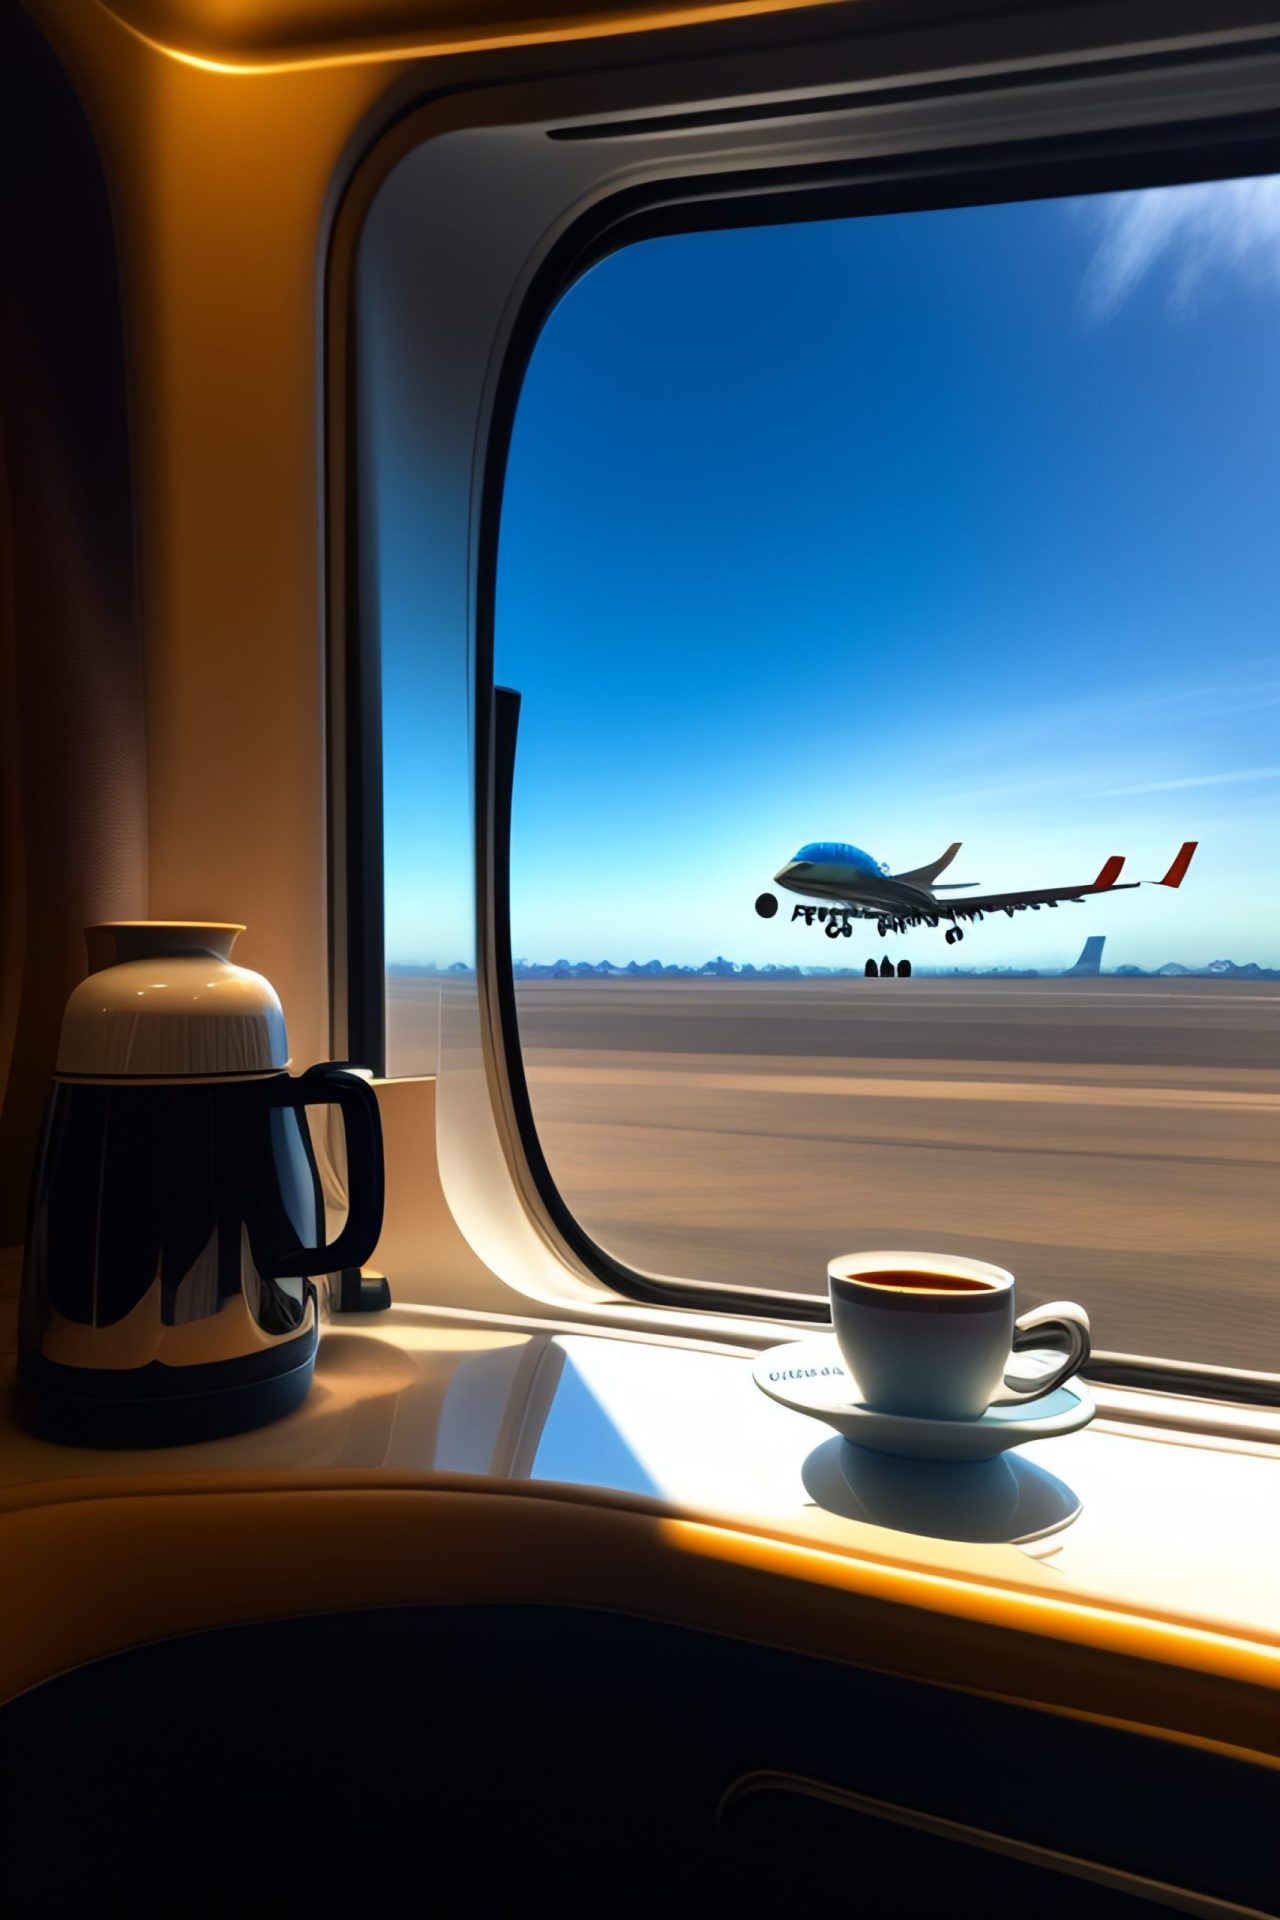 Do Airline or Hotel Cards Impact Your Credit?